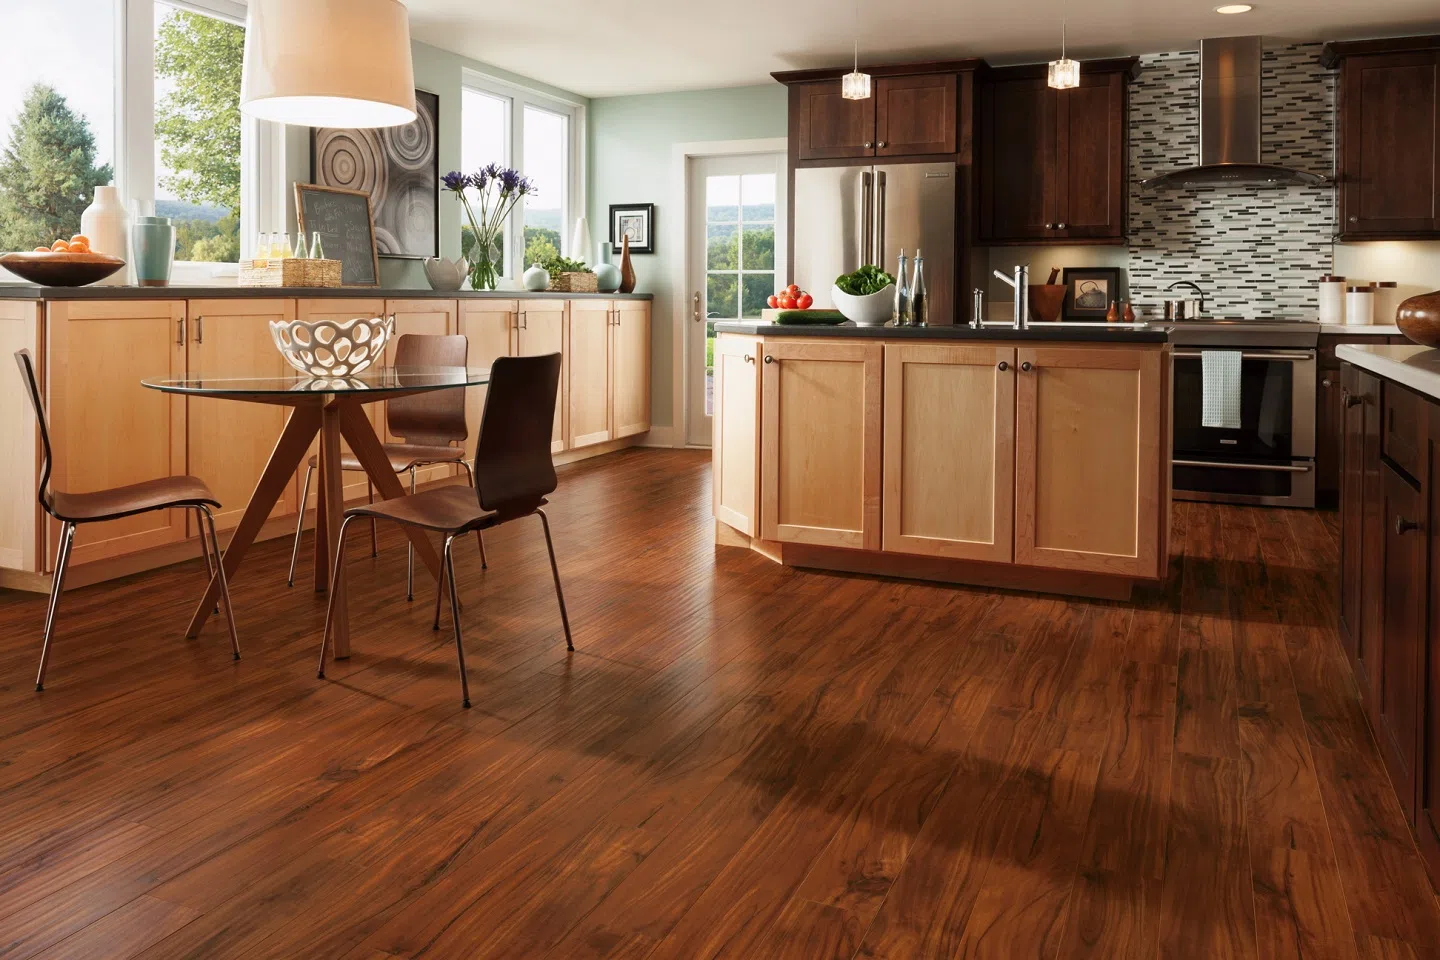 The Flexible Character of Laminate Flooring